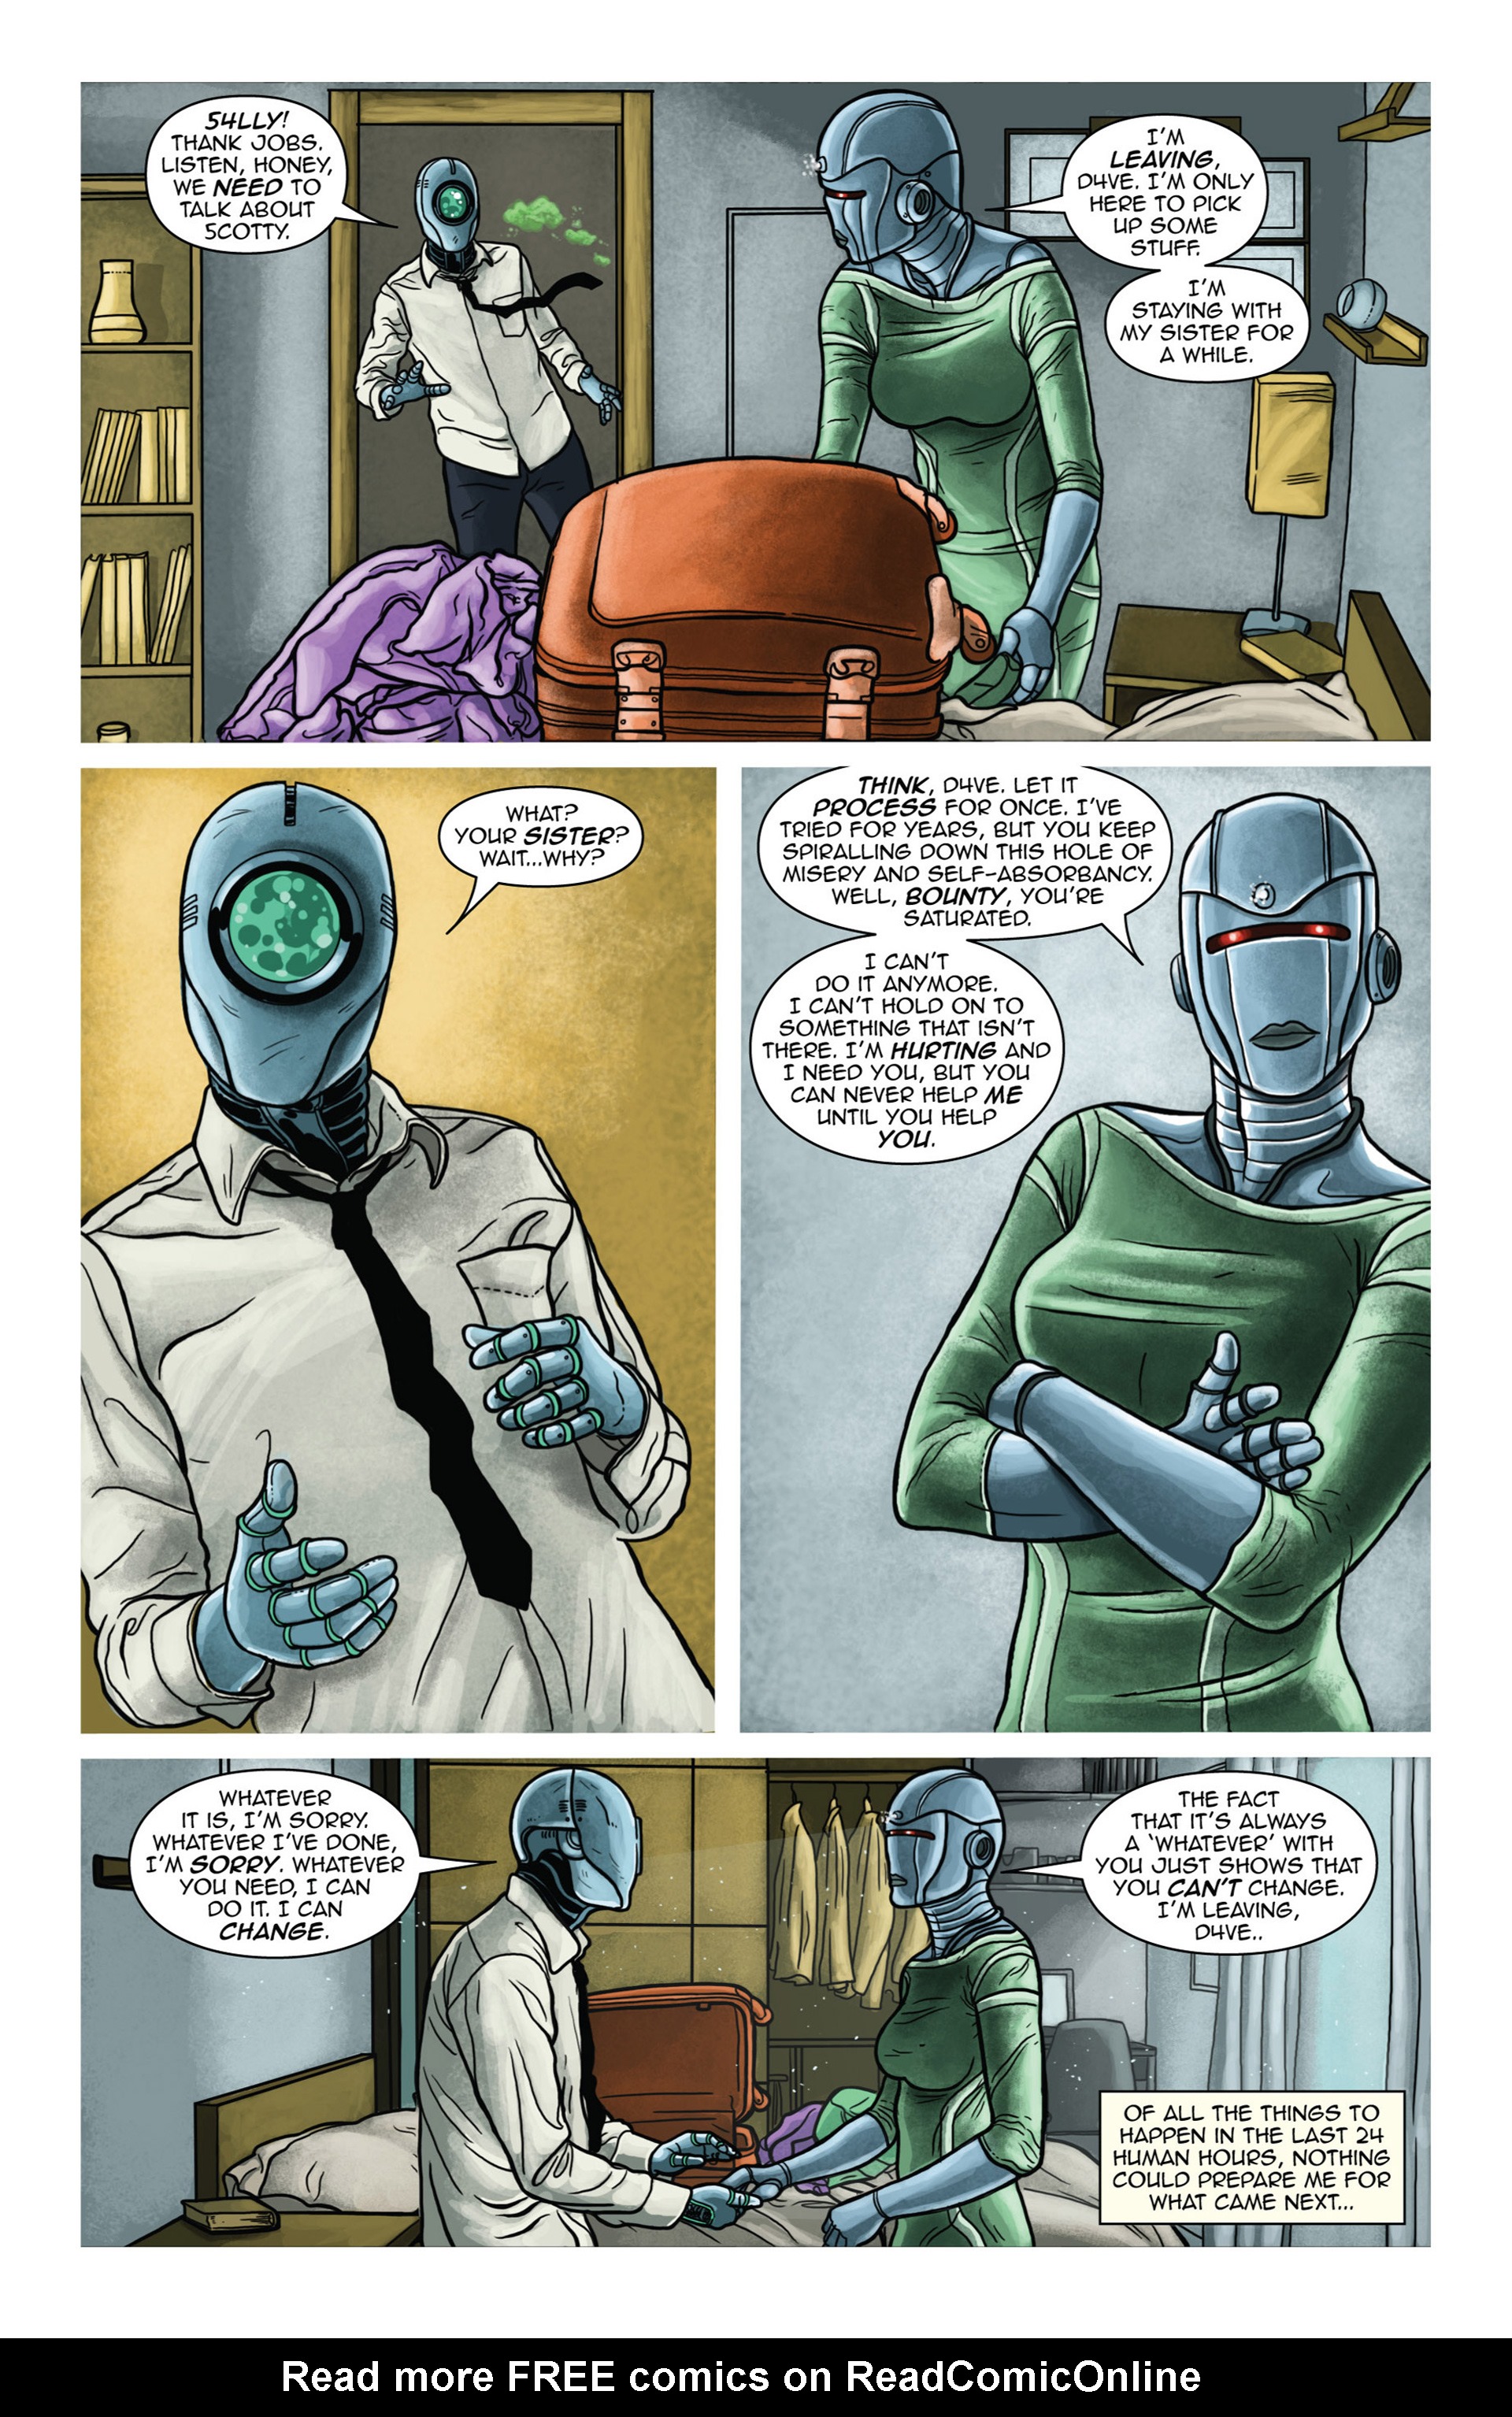 Read online D4VE comic -  Issue #2 - 11